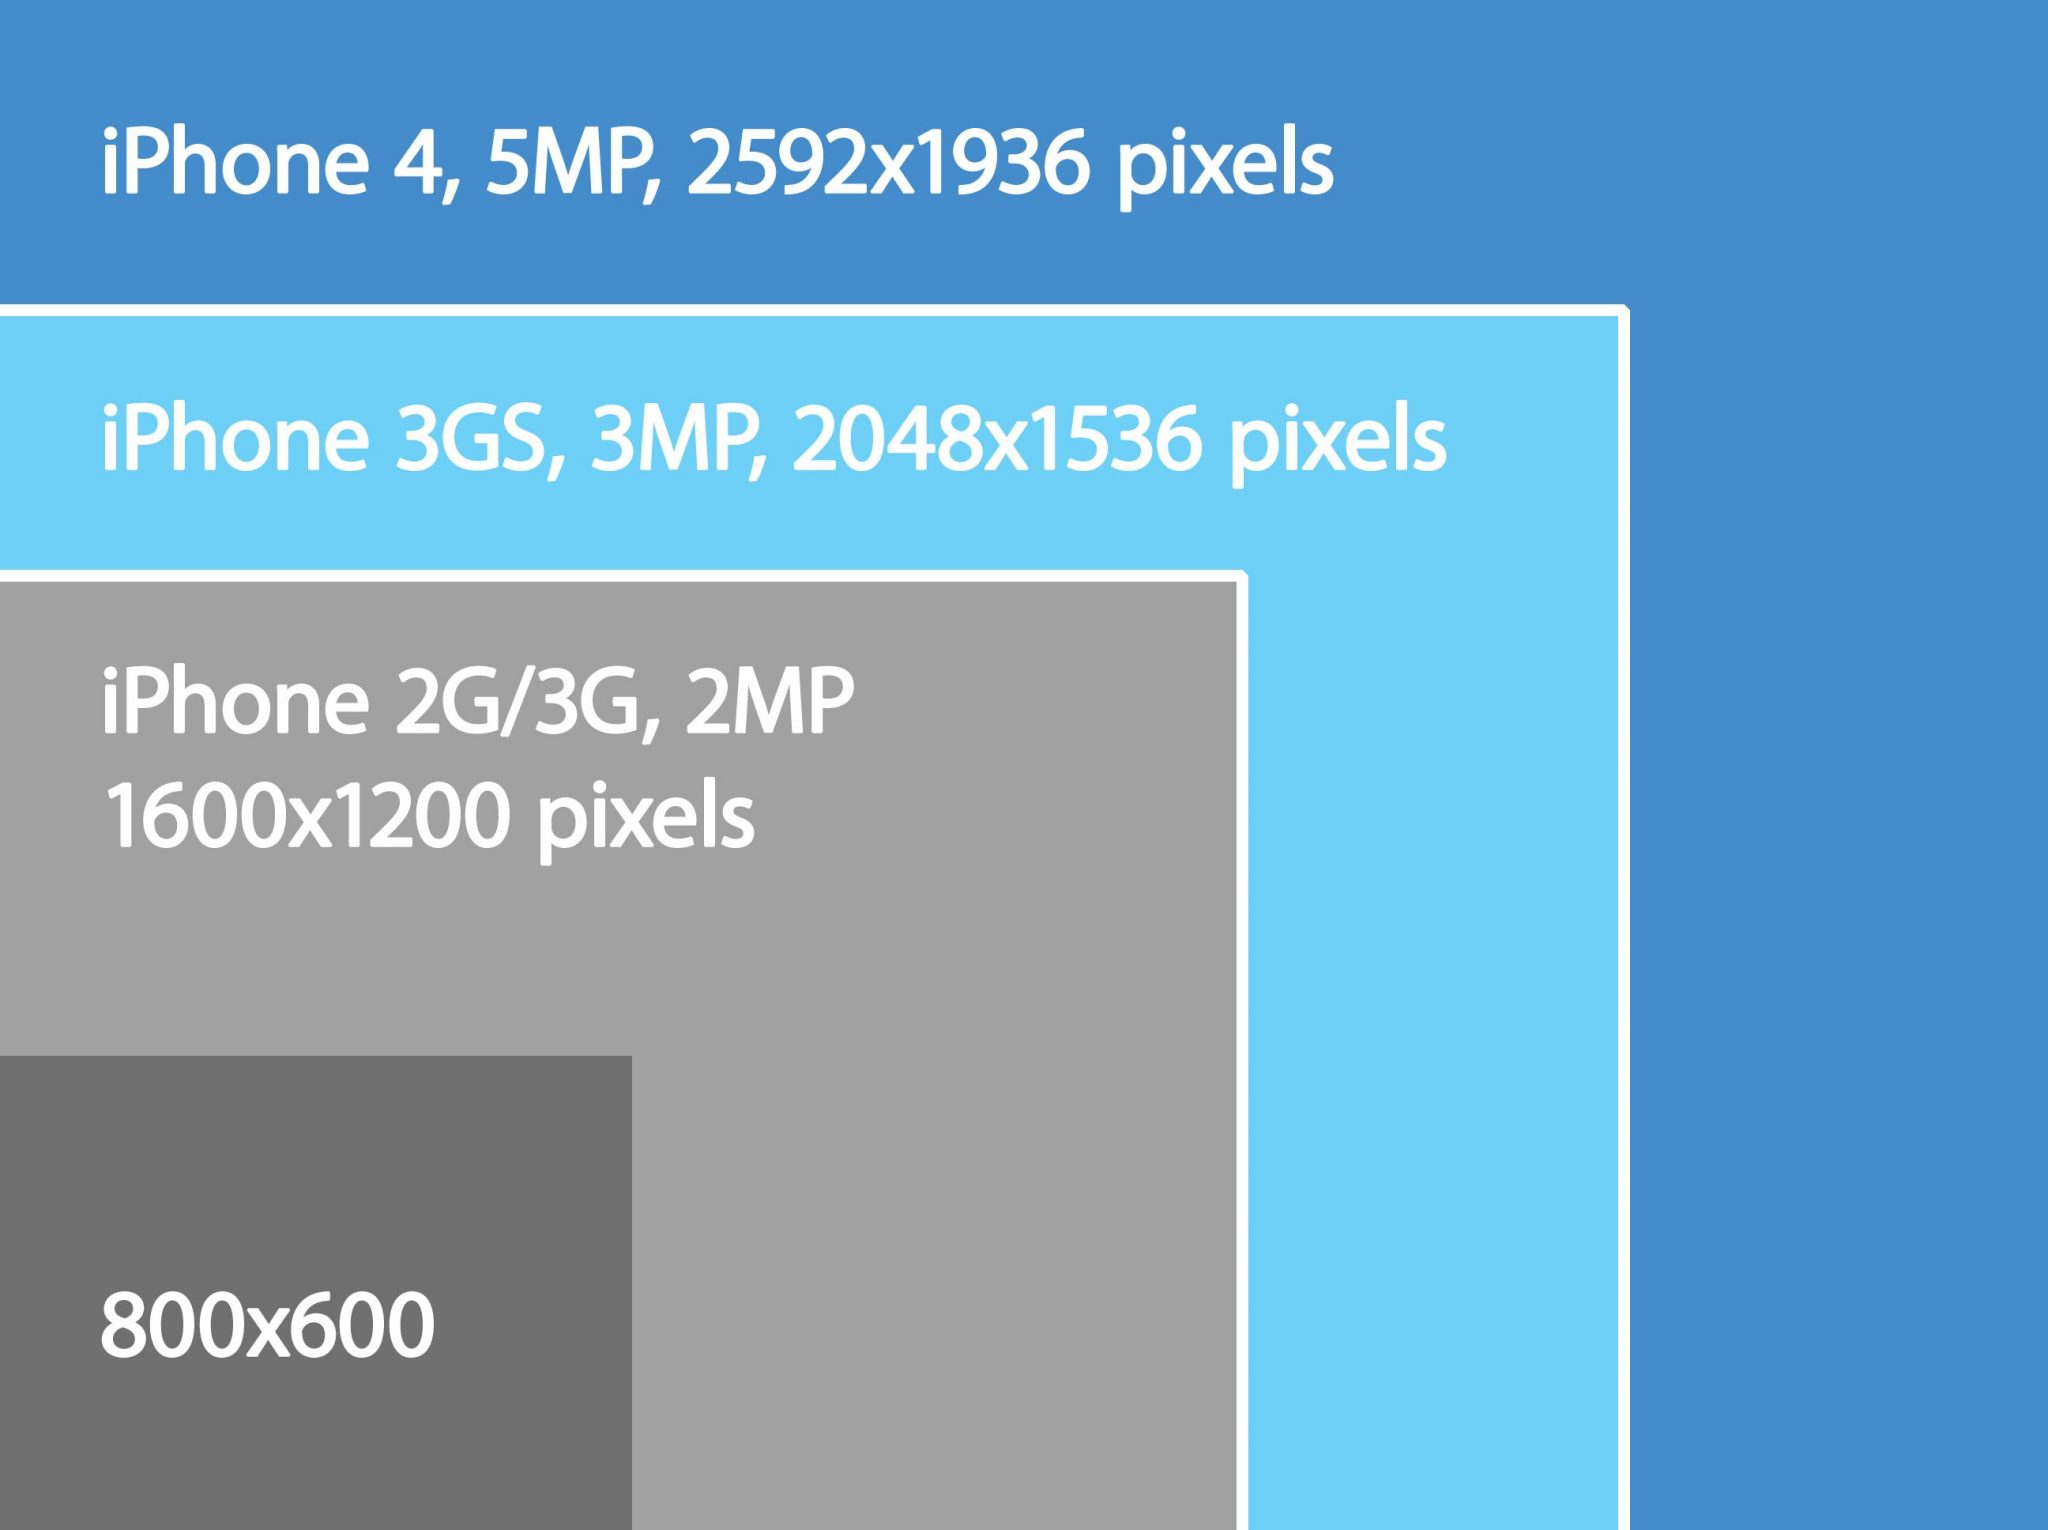 iPhone image sizes over the years – Why 800×600 really won’t cut it now.